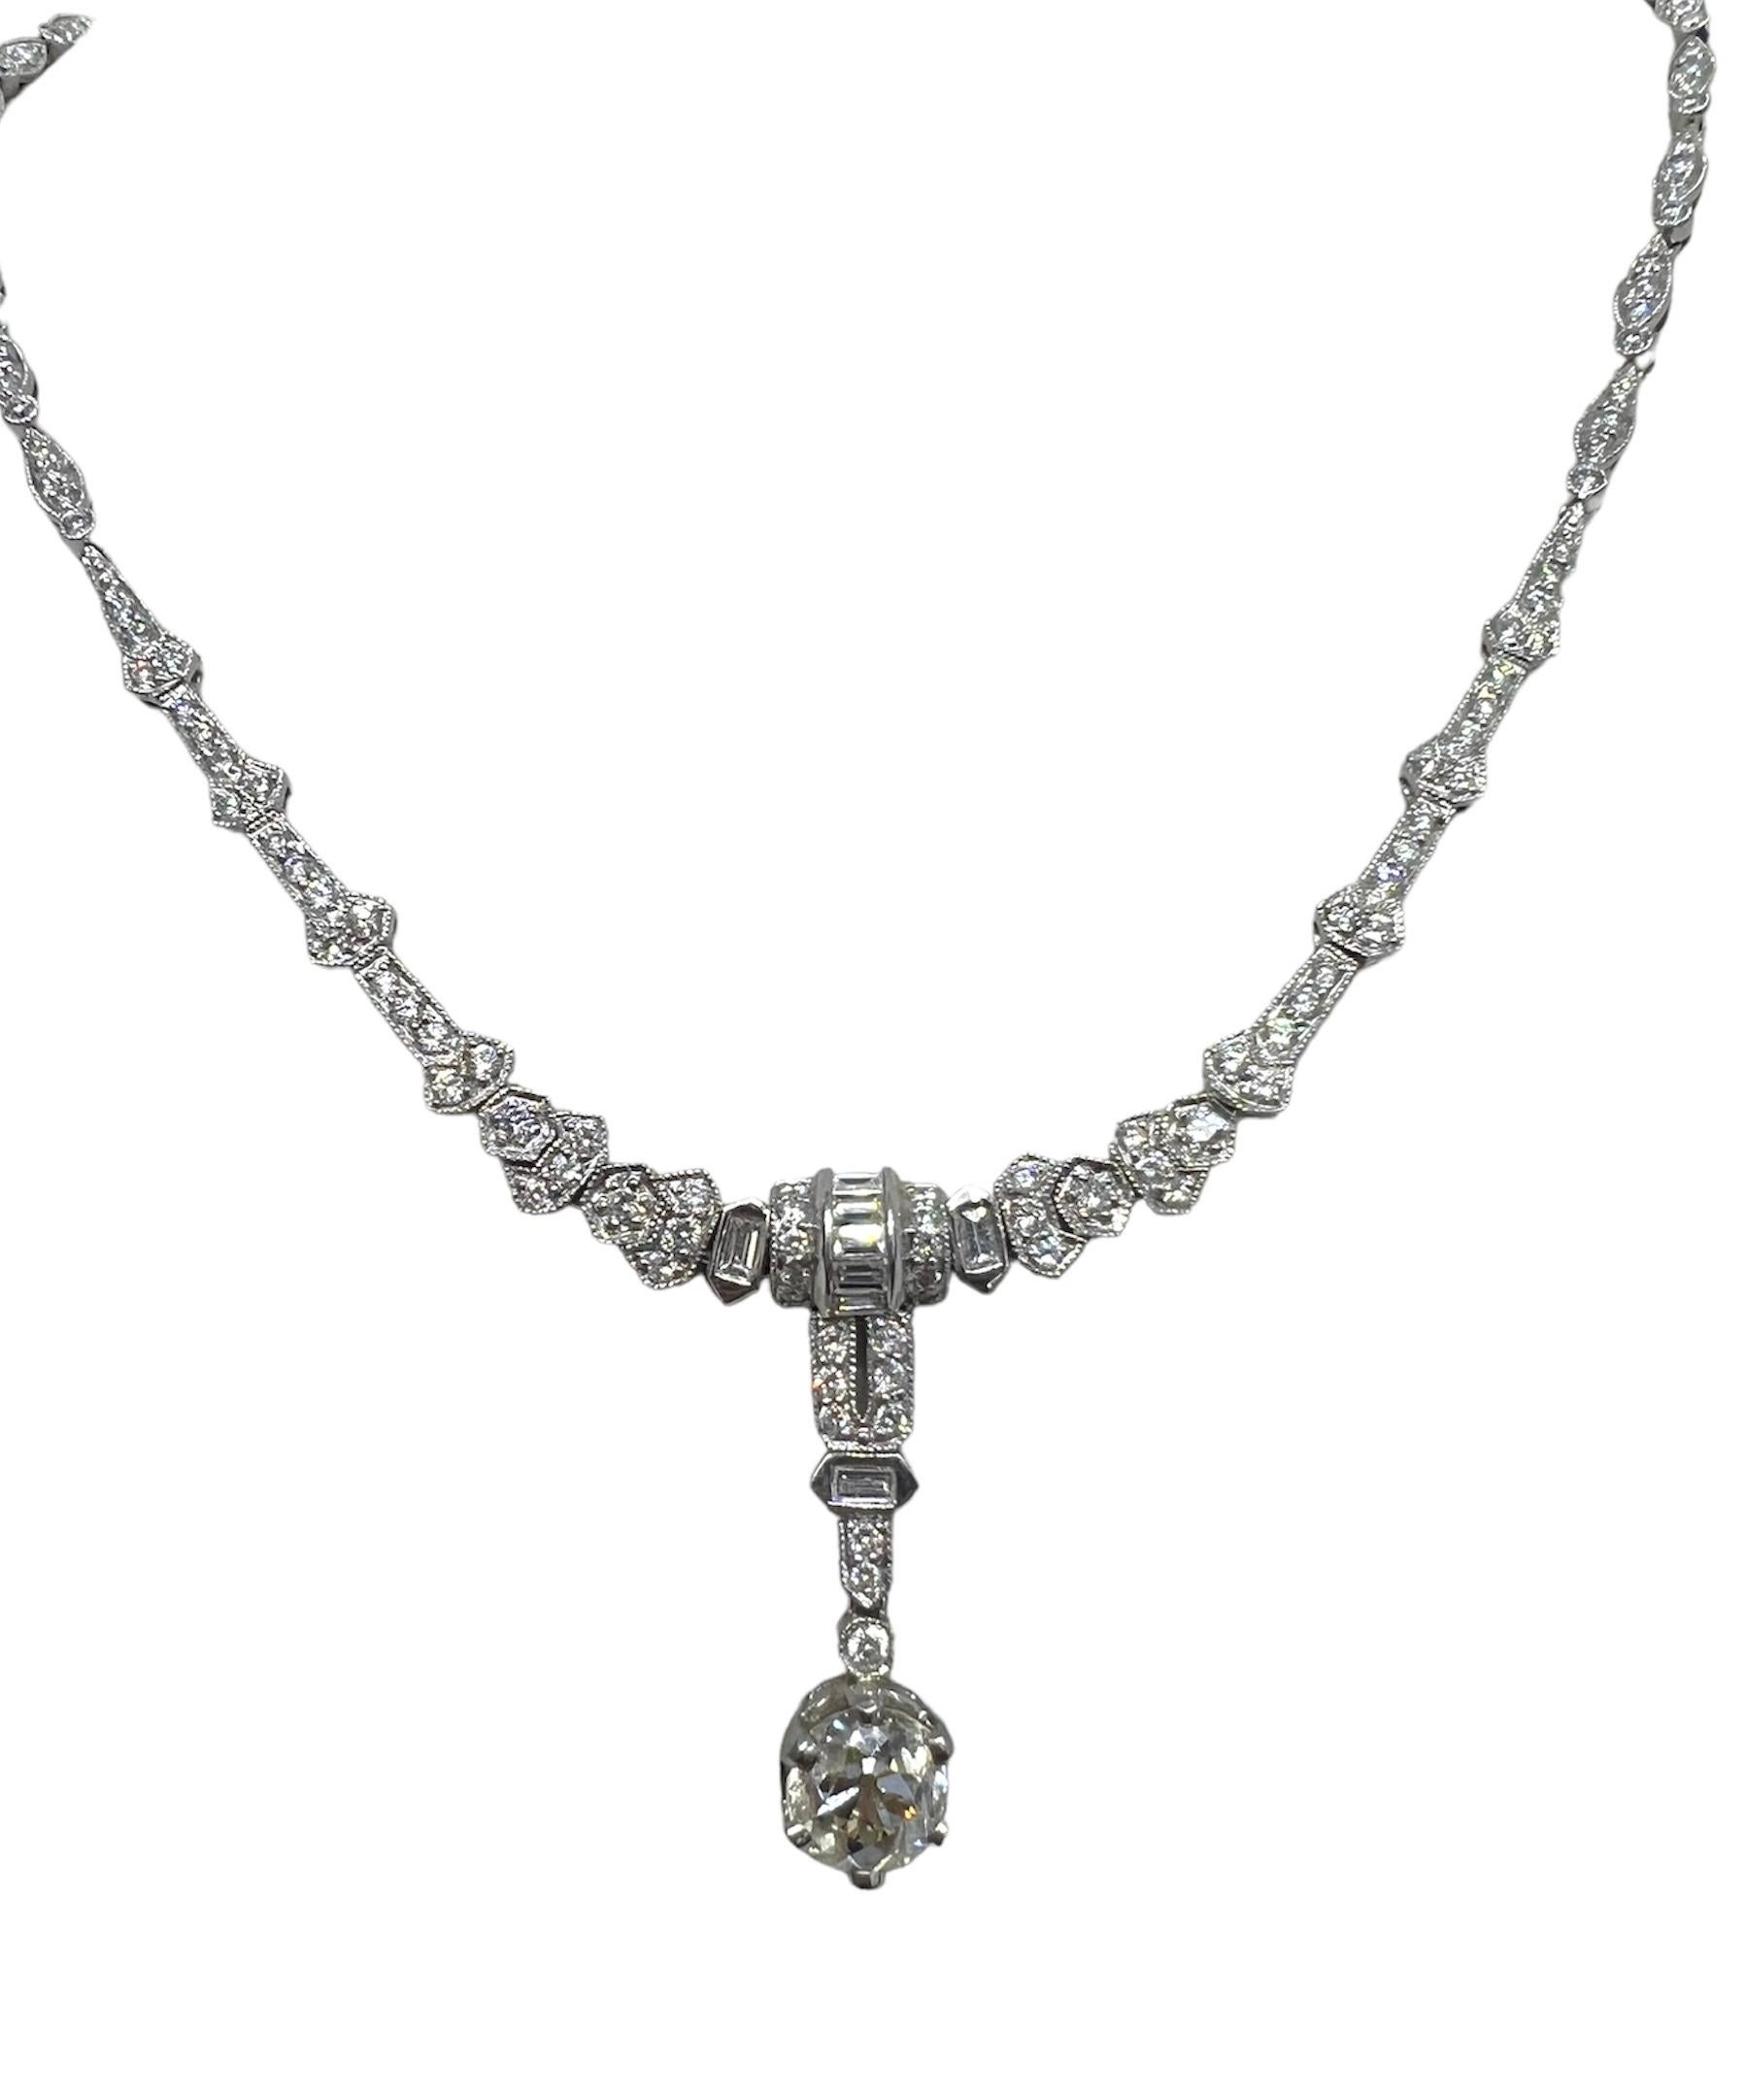 Platinum necklace with 1.44 carat round center stone pendant and 3.36 carats diamondss.

Sophia D by Joseph Dardashti LTD has been known worldwide for 35 years and are inspired by classic Art Deco design that merges with modern manufacturing